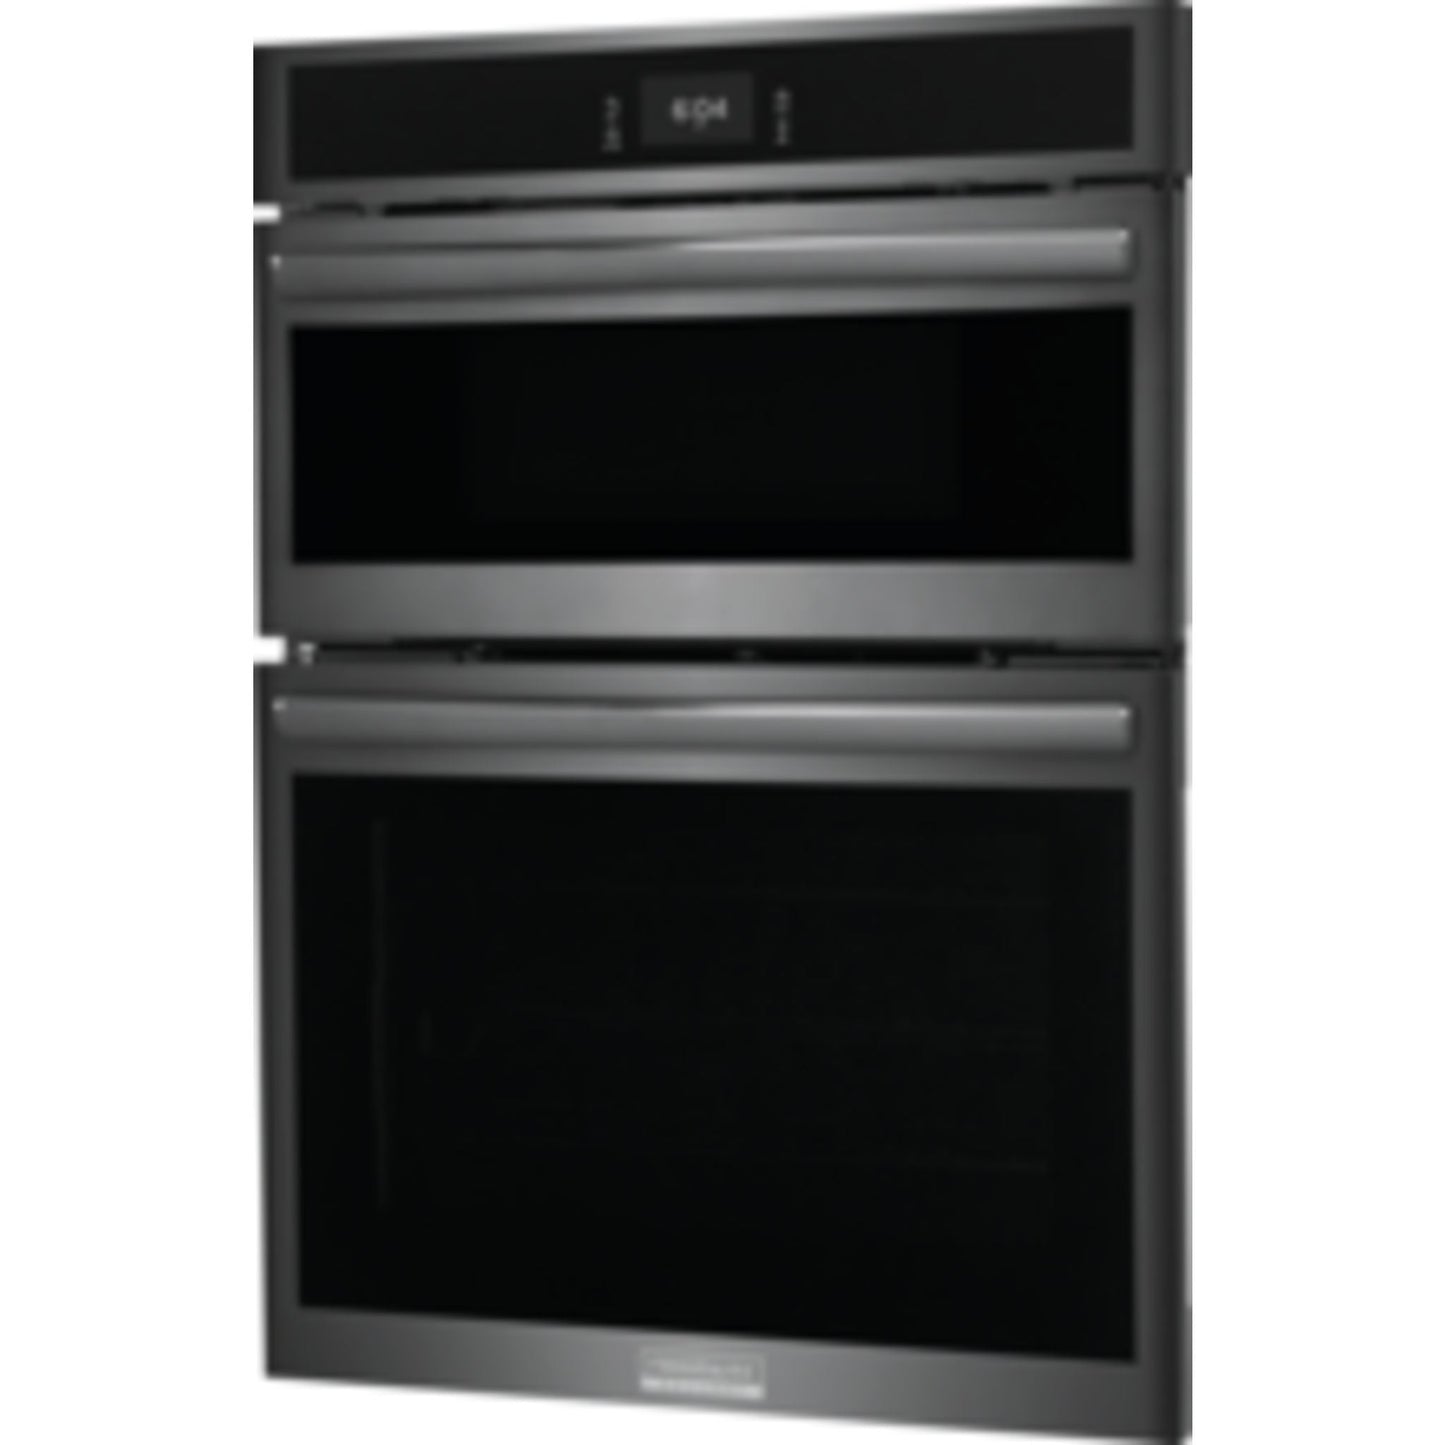 Frigidaire Gallery 30" Microwave/Wall Oven (GCWM3067AD) - Black Stainless, SmudgeProof